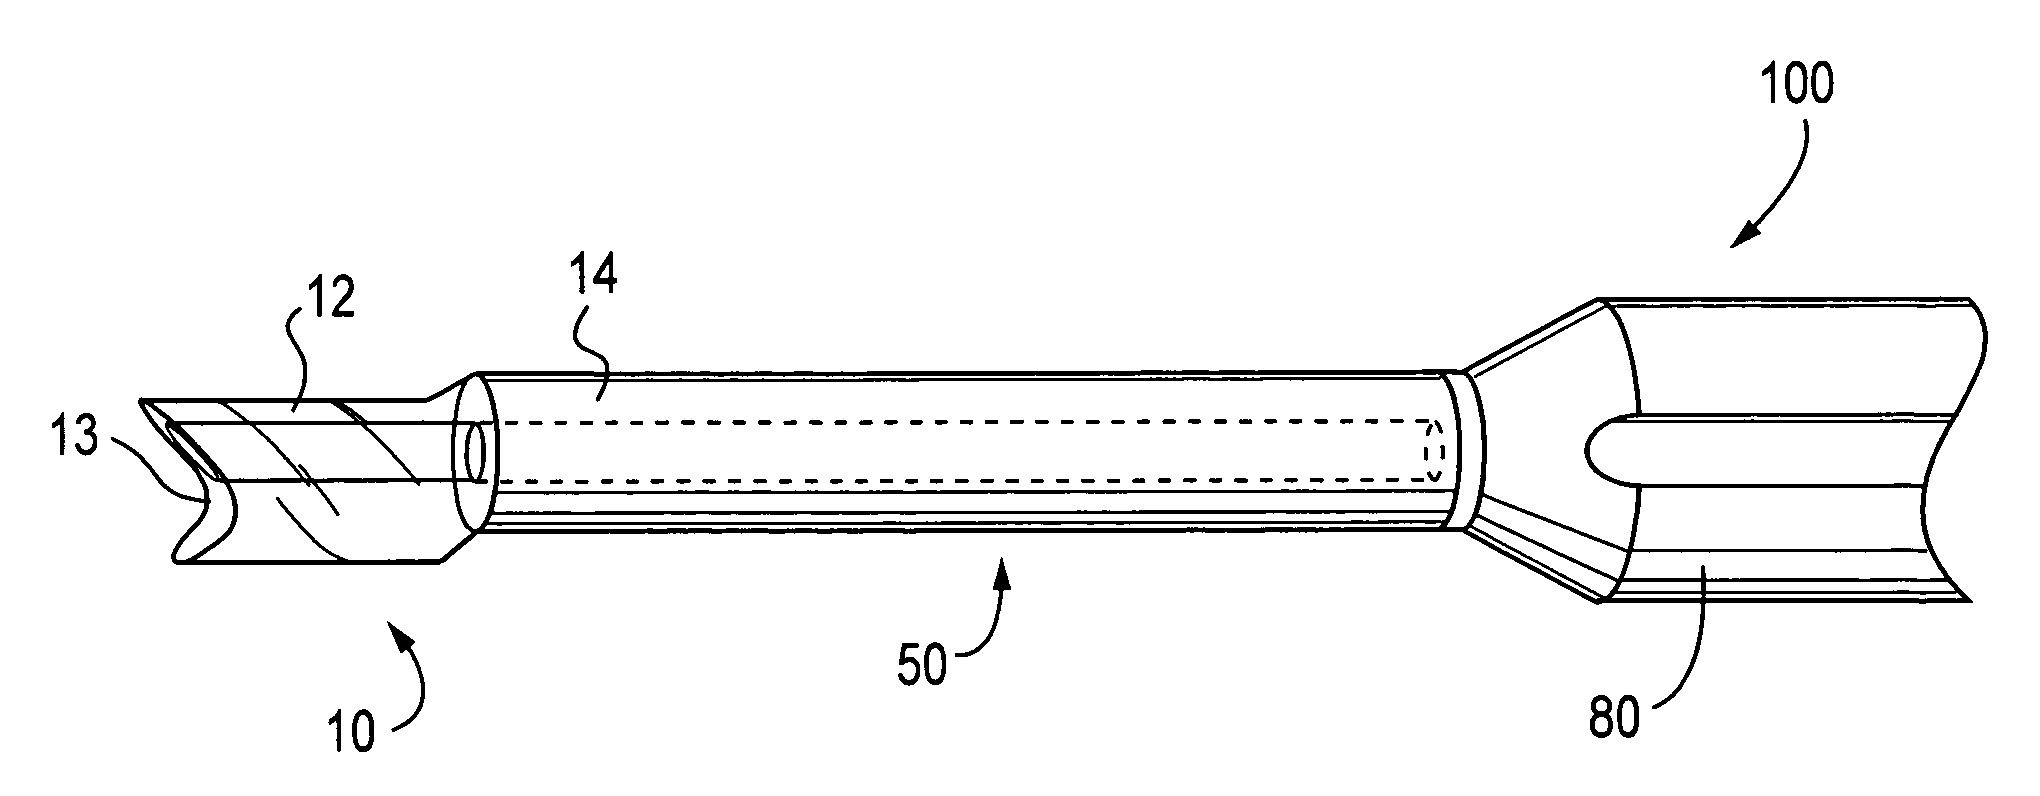 Method of using offset drill guide in arthroscopic surgery